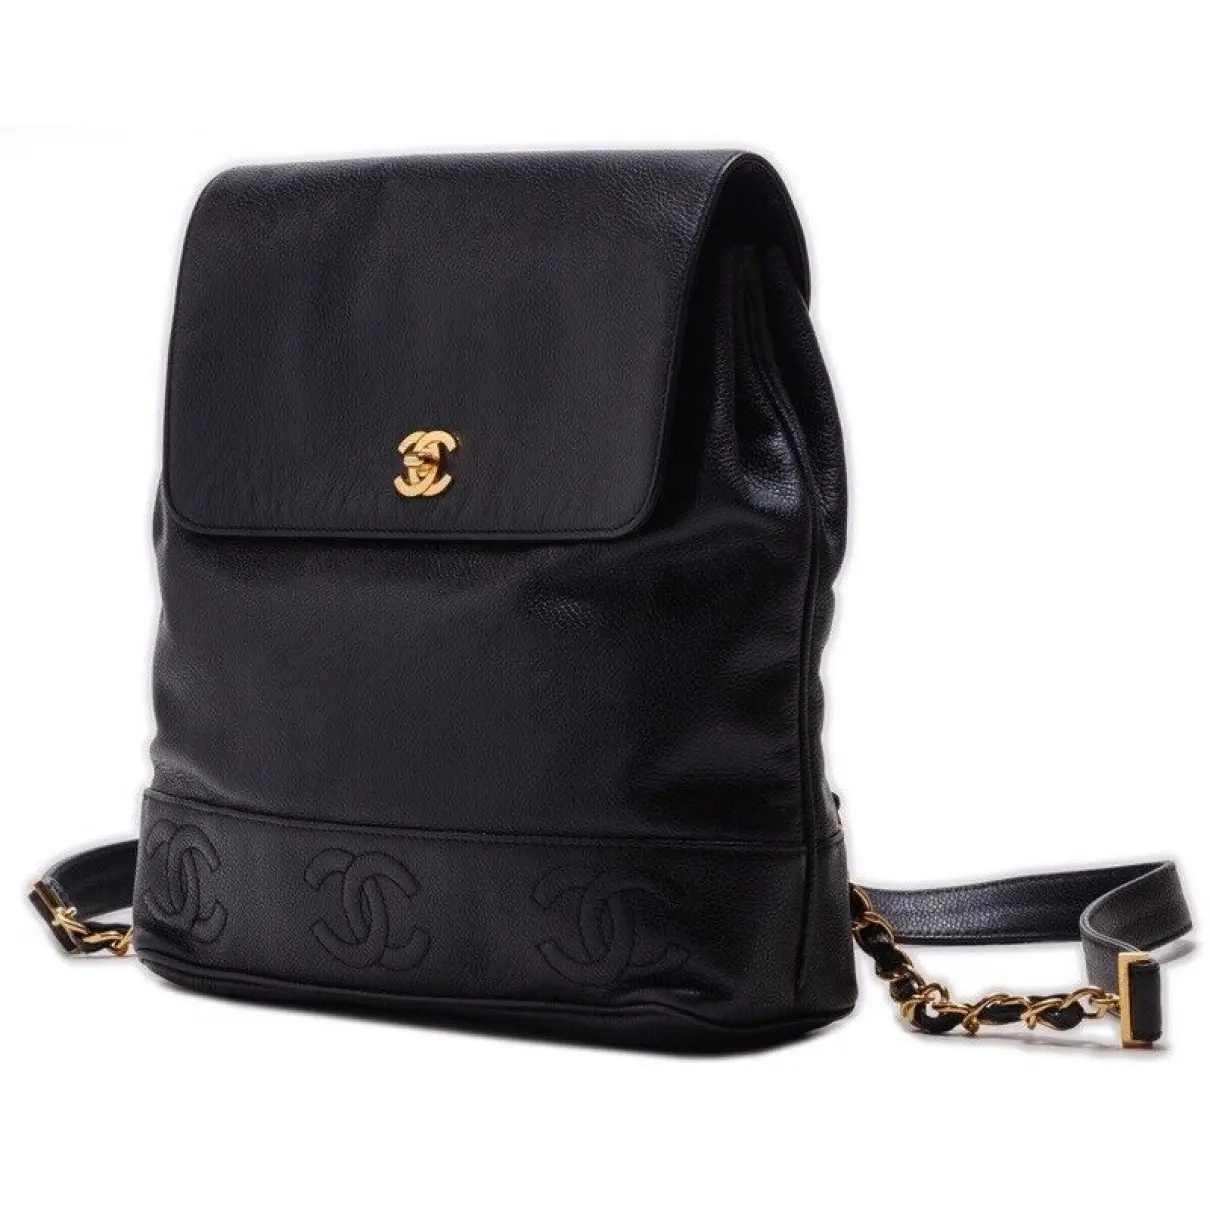 Buy Chanel Leather backpack online